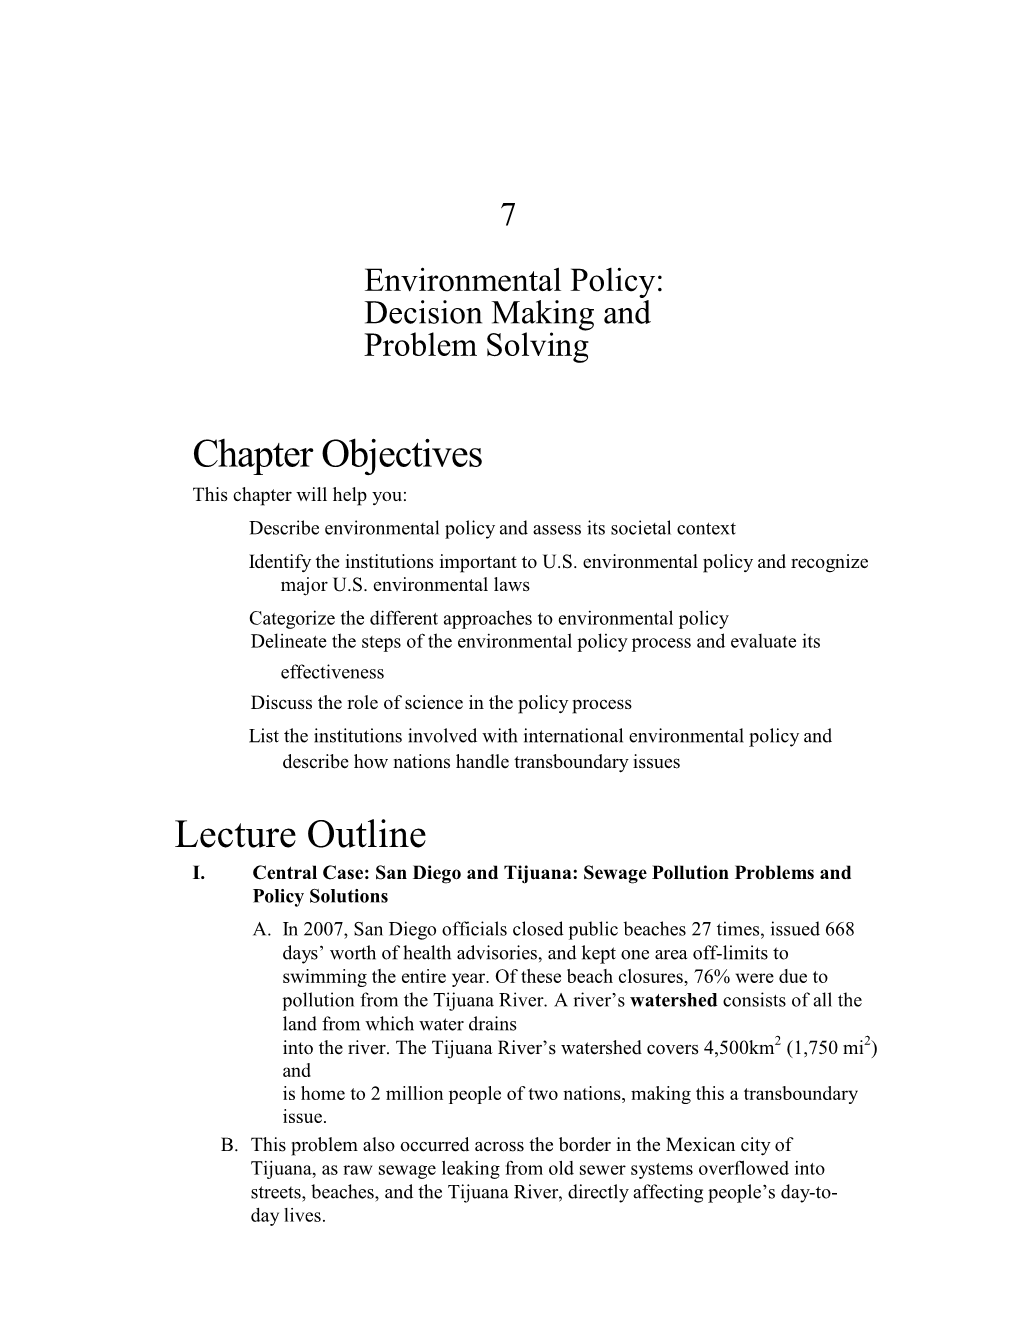 7 Environmental Policy: Decision Making and Problem Solving